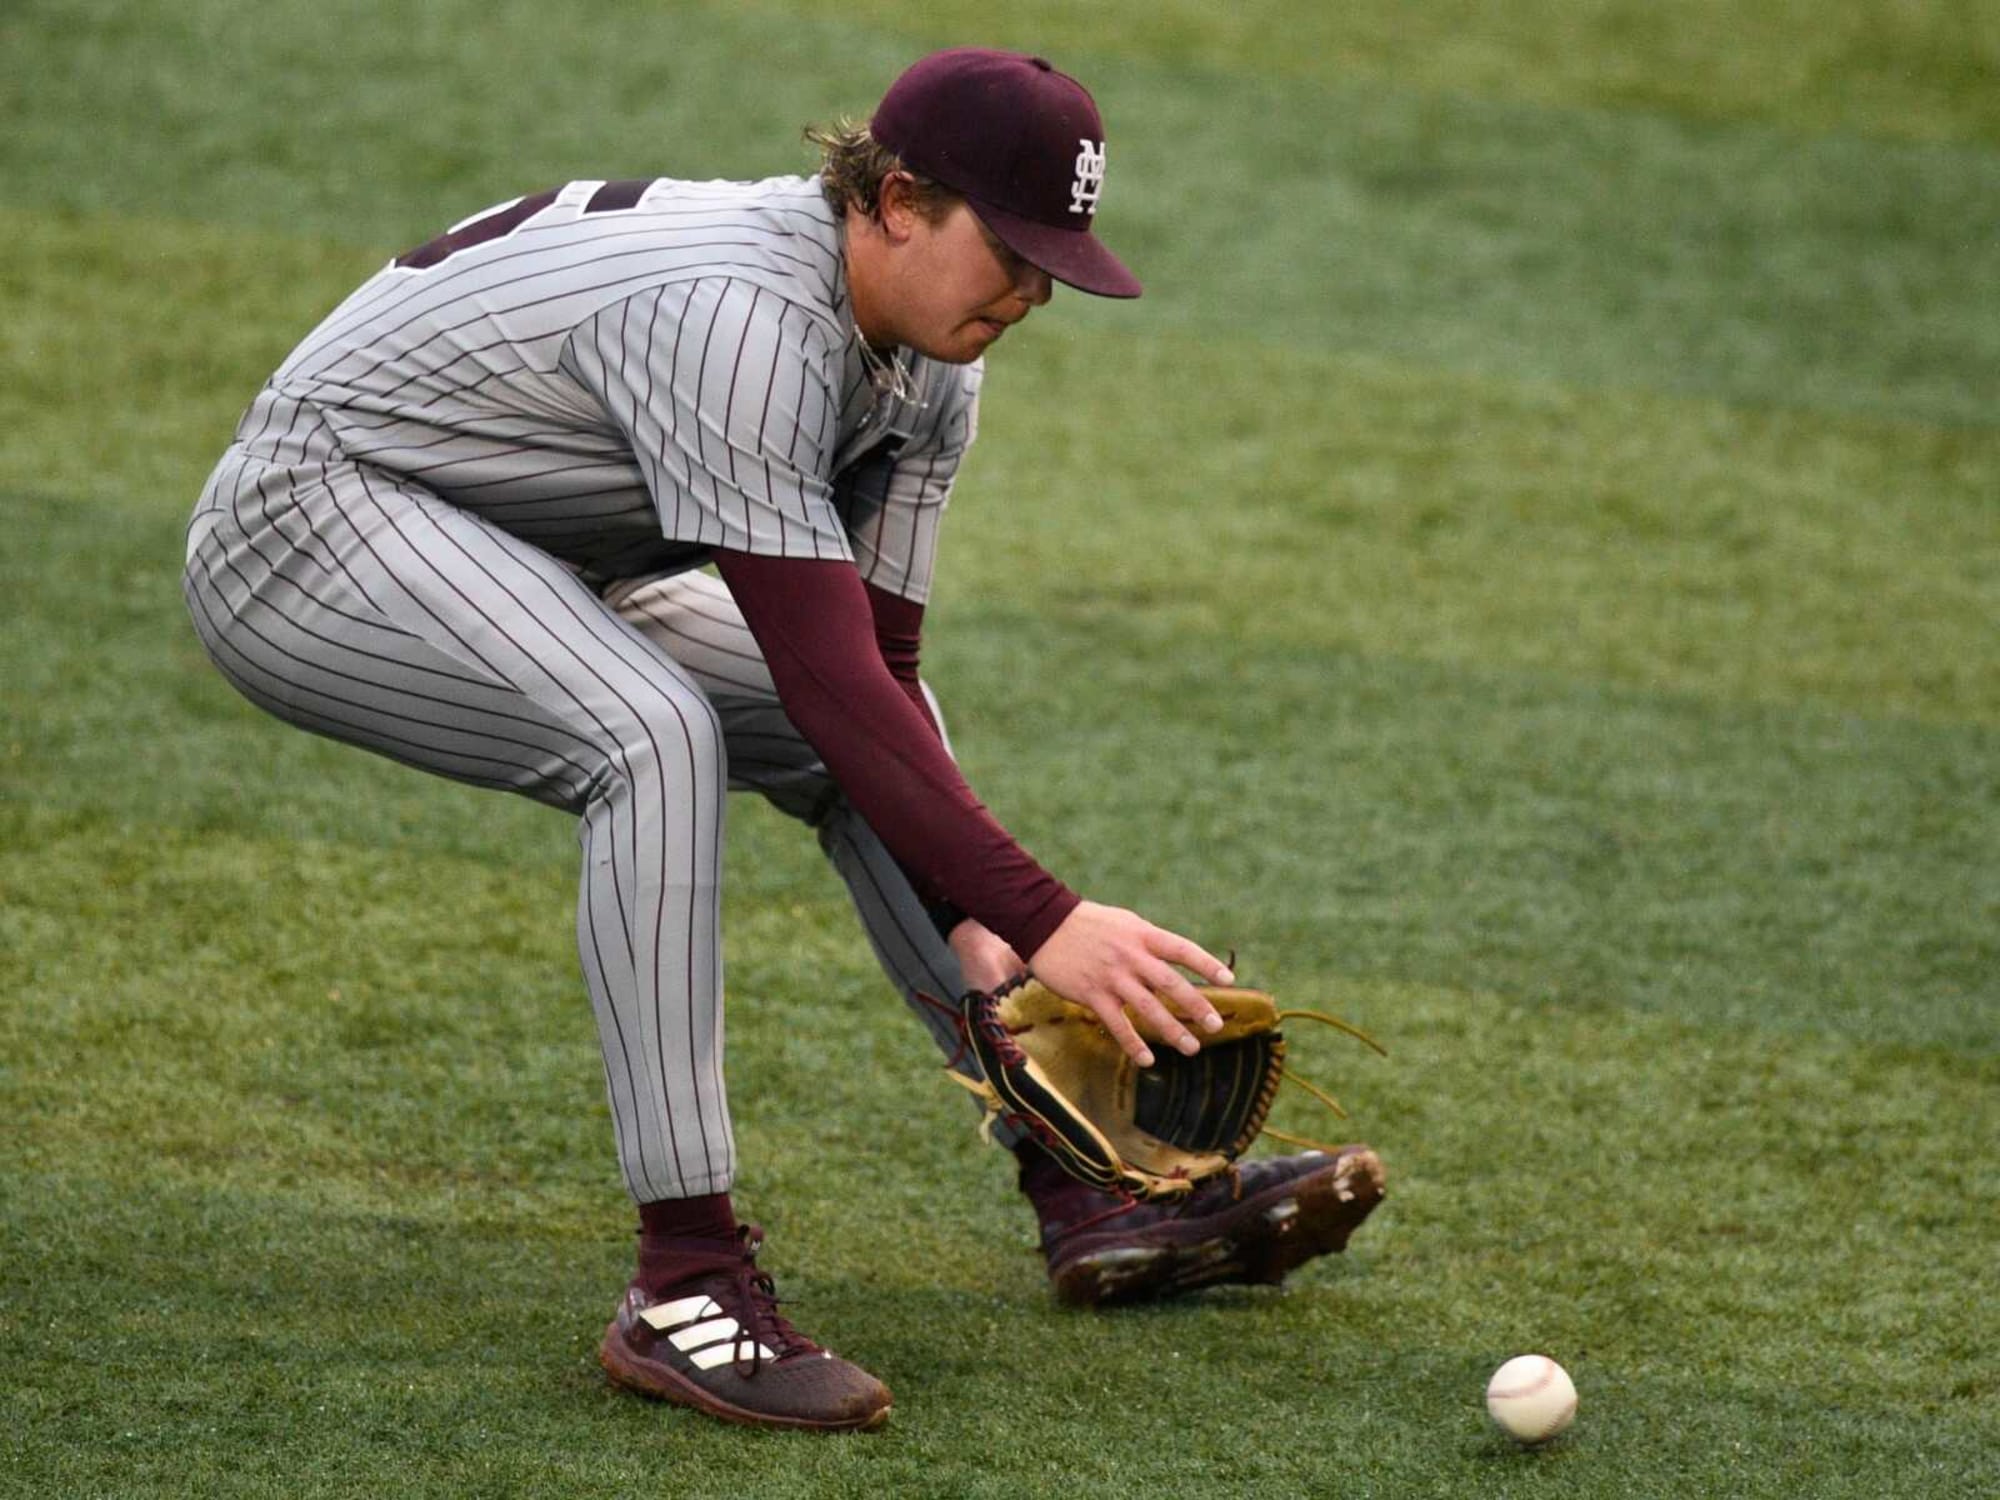 Mississippi State Baseball vs. Tennessee Game 3: Start time and TV info